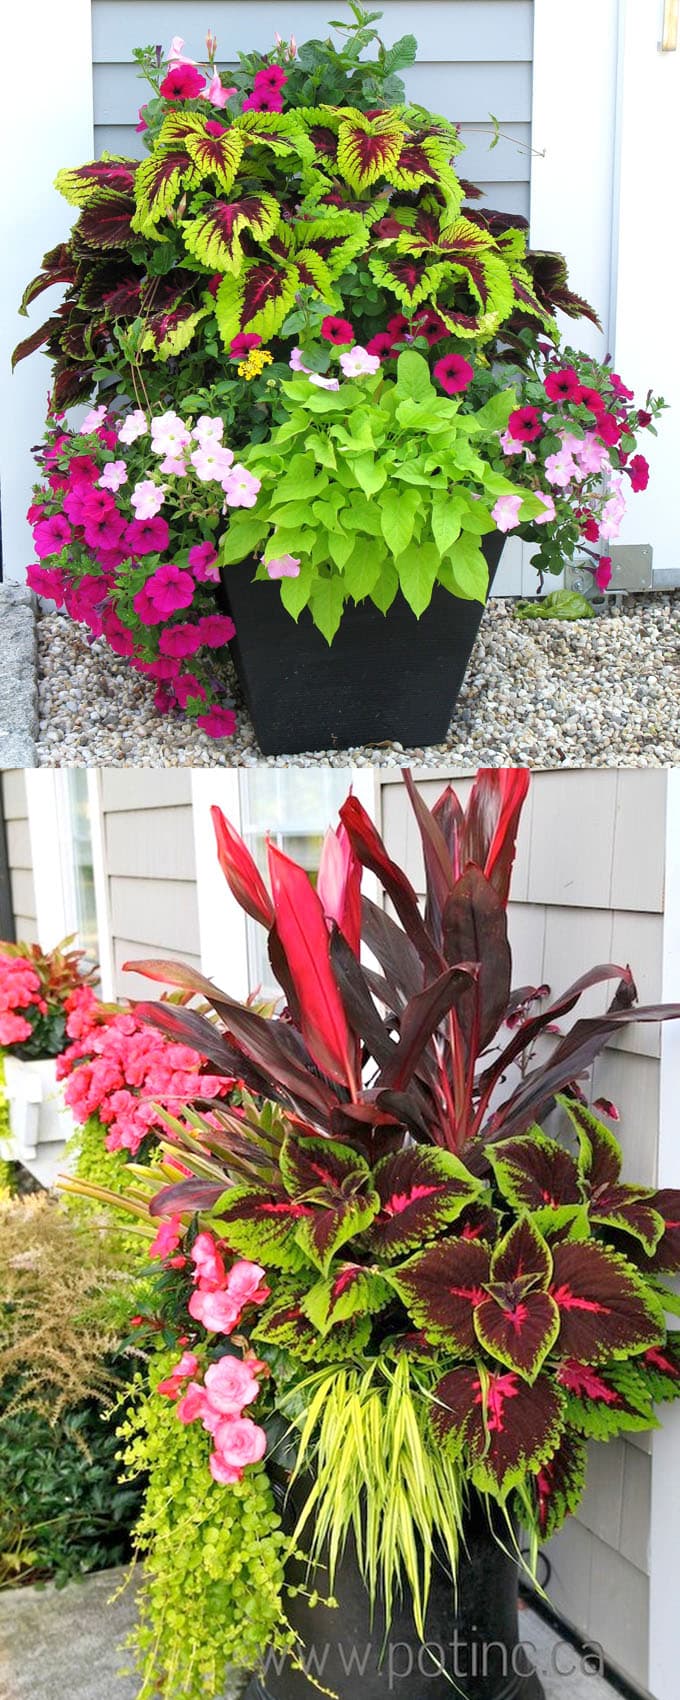 Evergreen Container Plants For Shade